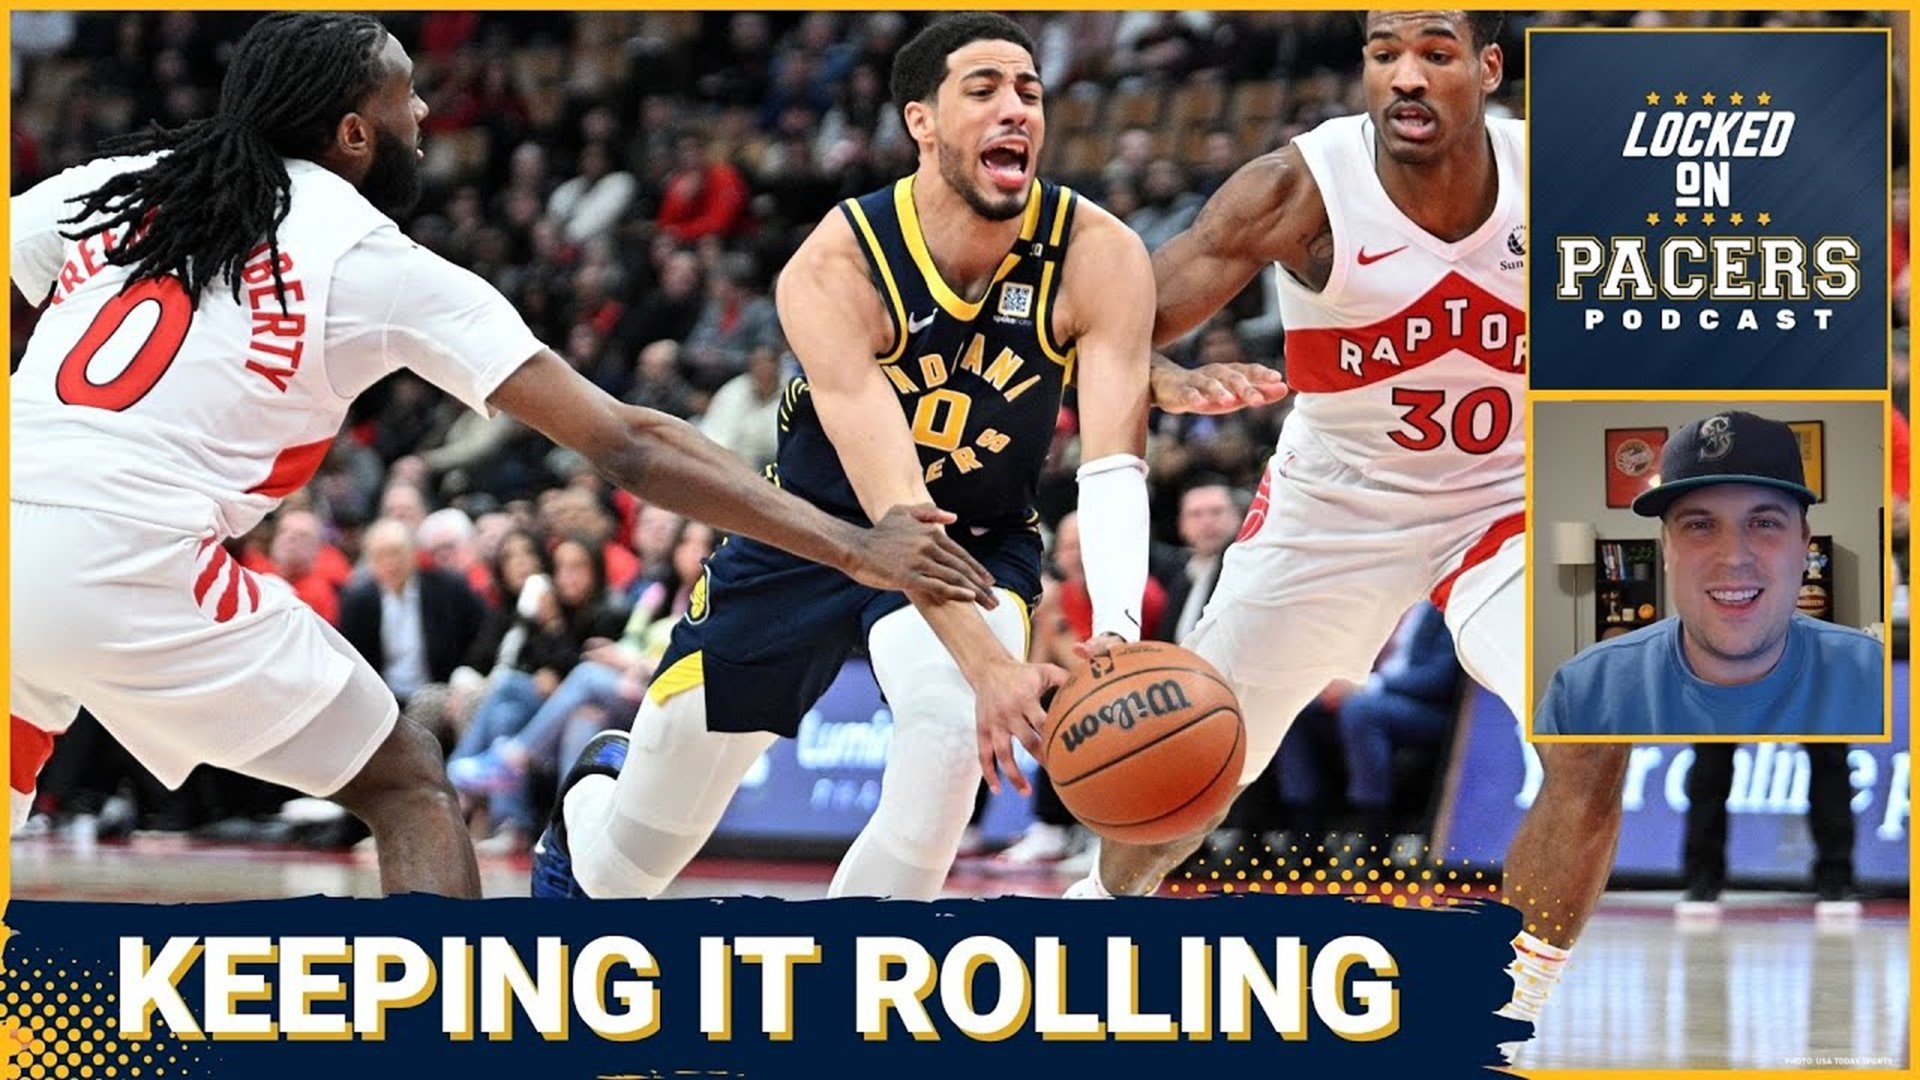 Tyrese Haliburton finally cracks 30 points again as Indiana Pacers beat Toronto Raptors on the road